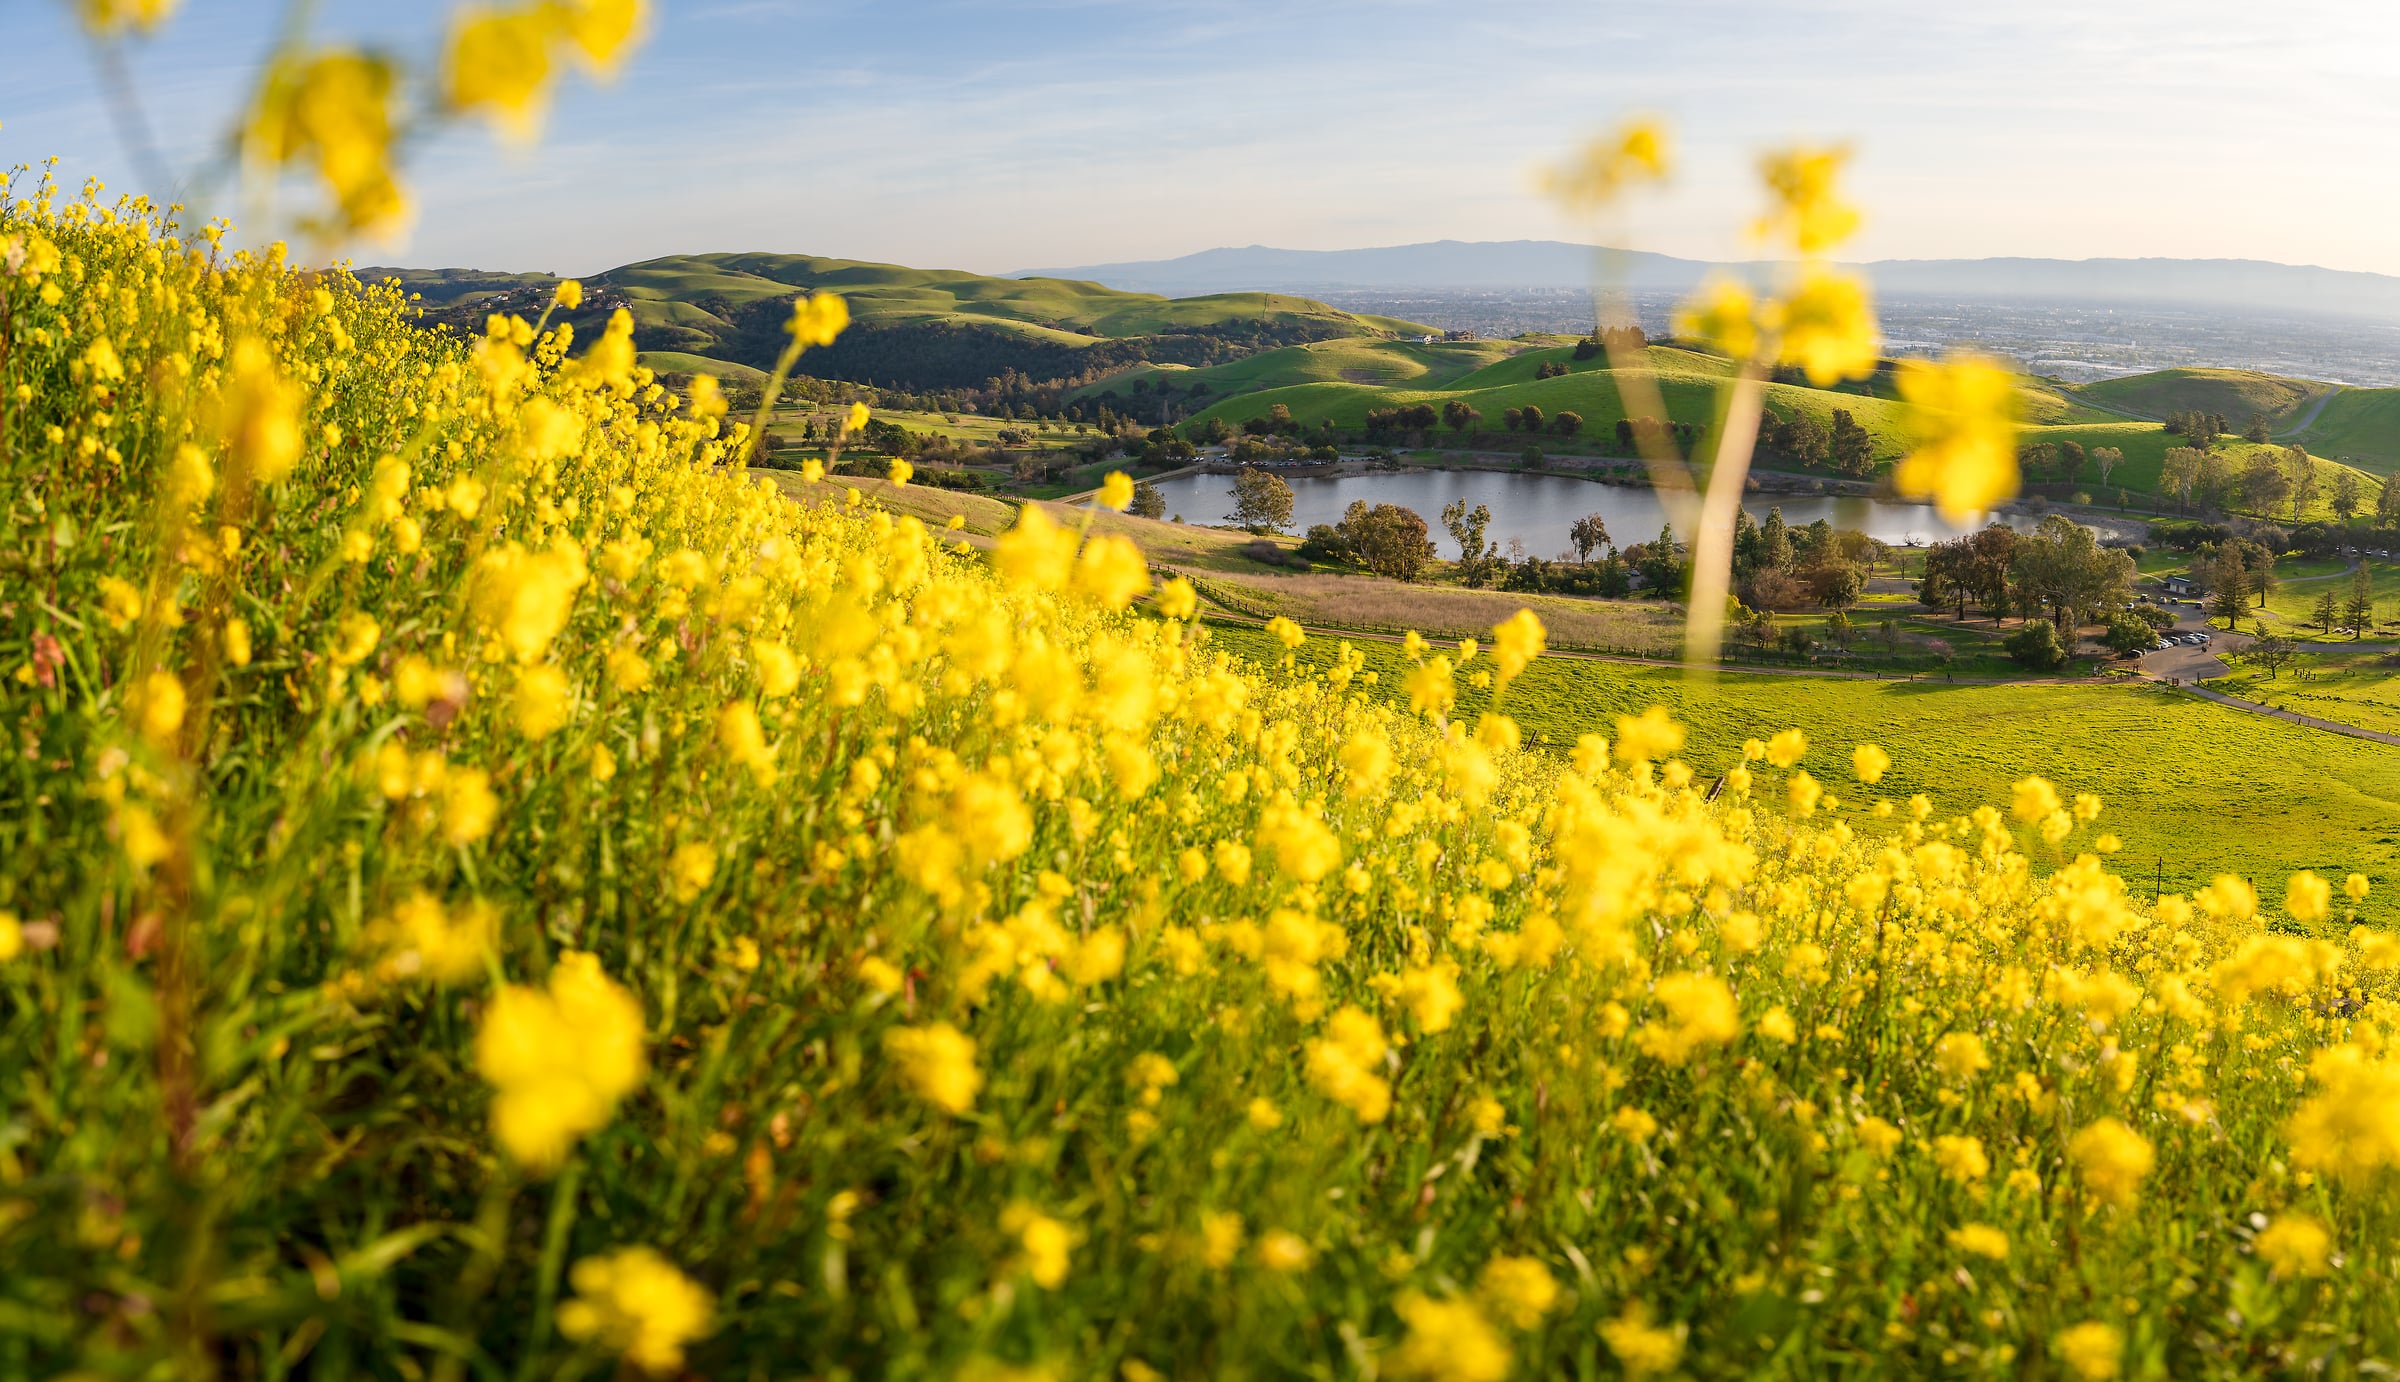 140 megapixels! A very high resolution, large-format VAST photo print of a field of spring flowers; landscape photograph created by Jeff Lewis in San Jose, California.